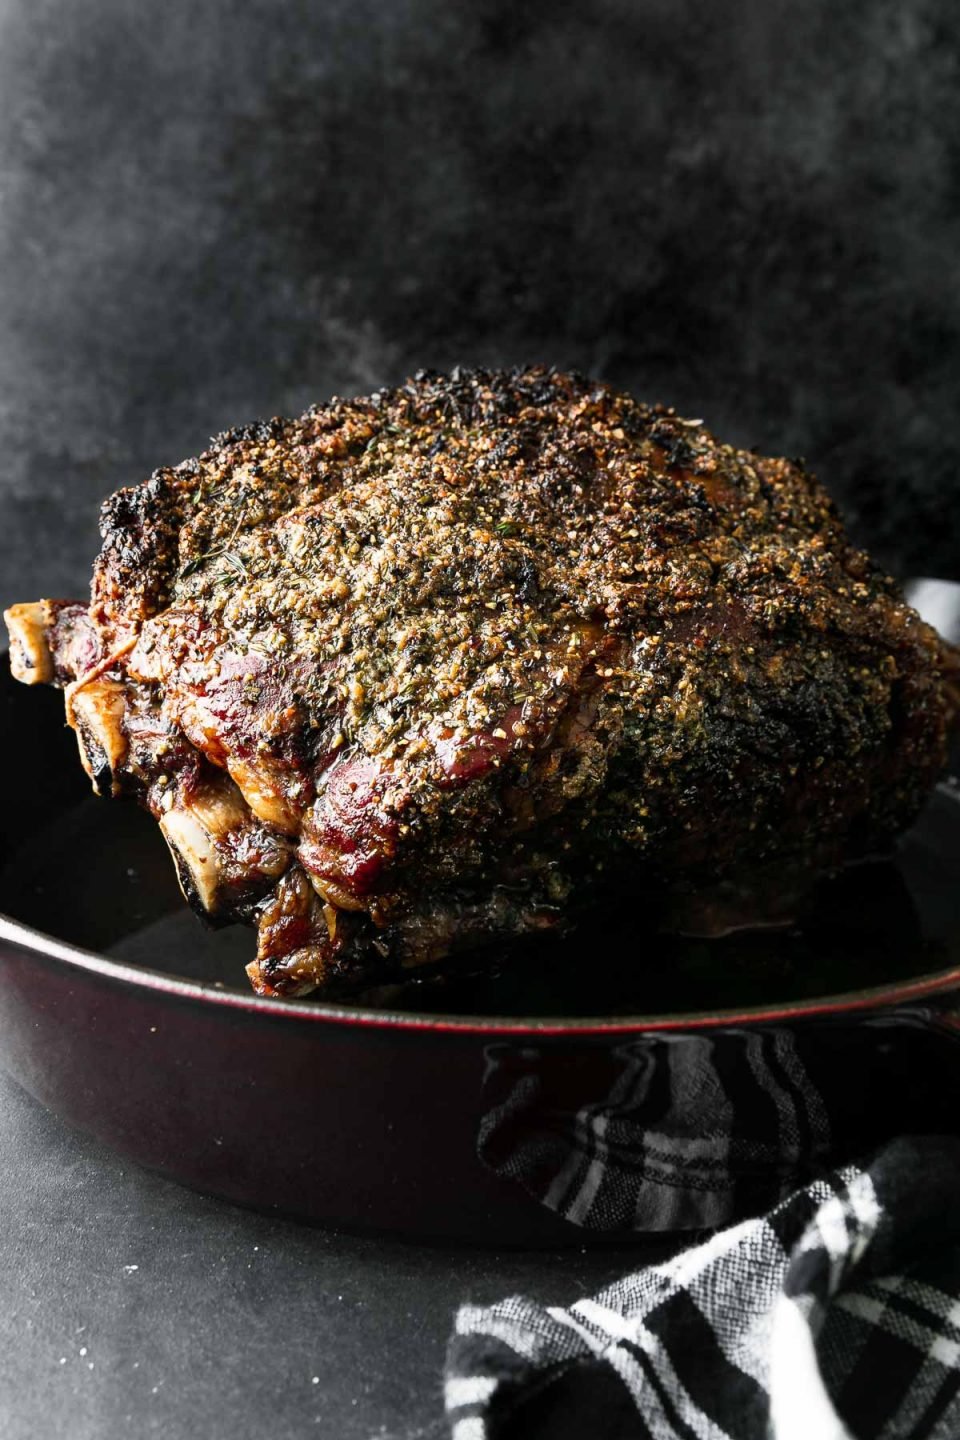 A side angle shot of roasted Prime Rib covered in a Garlic Herb Rub sits inside of a cherry red Staub cast iron Deep Skillet. The skillet sits atop a dark textured surface with a black and white plaid linen napkin resting alongside.